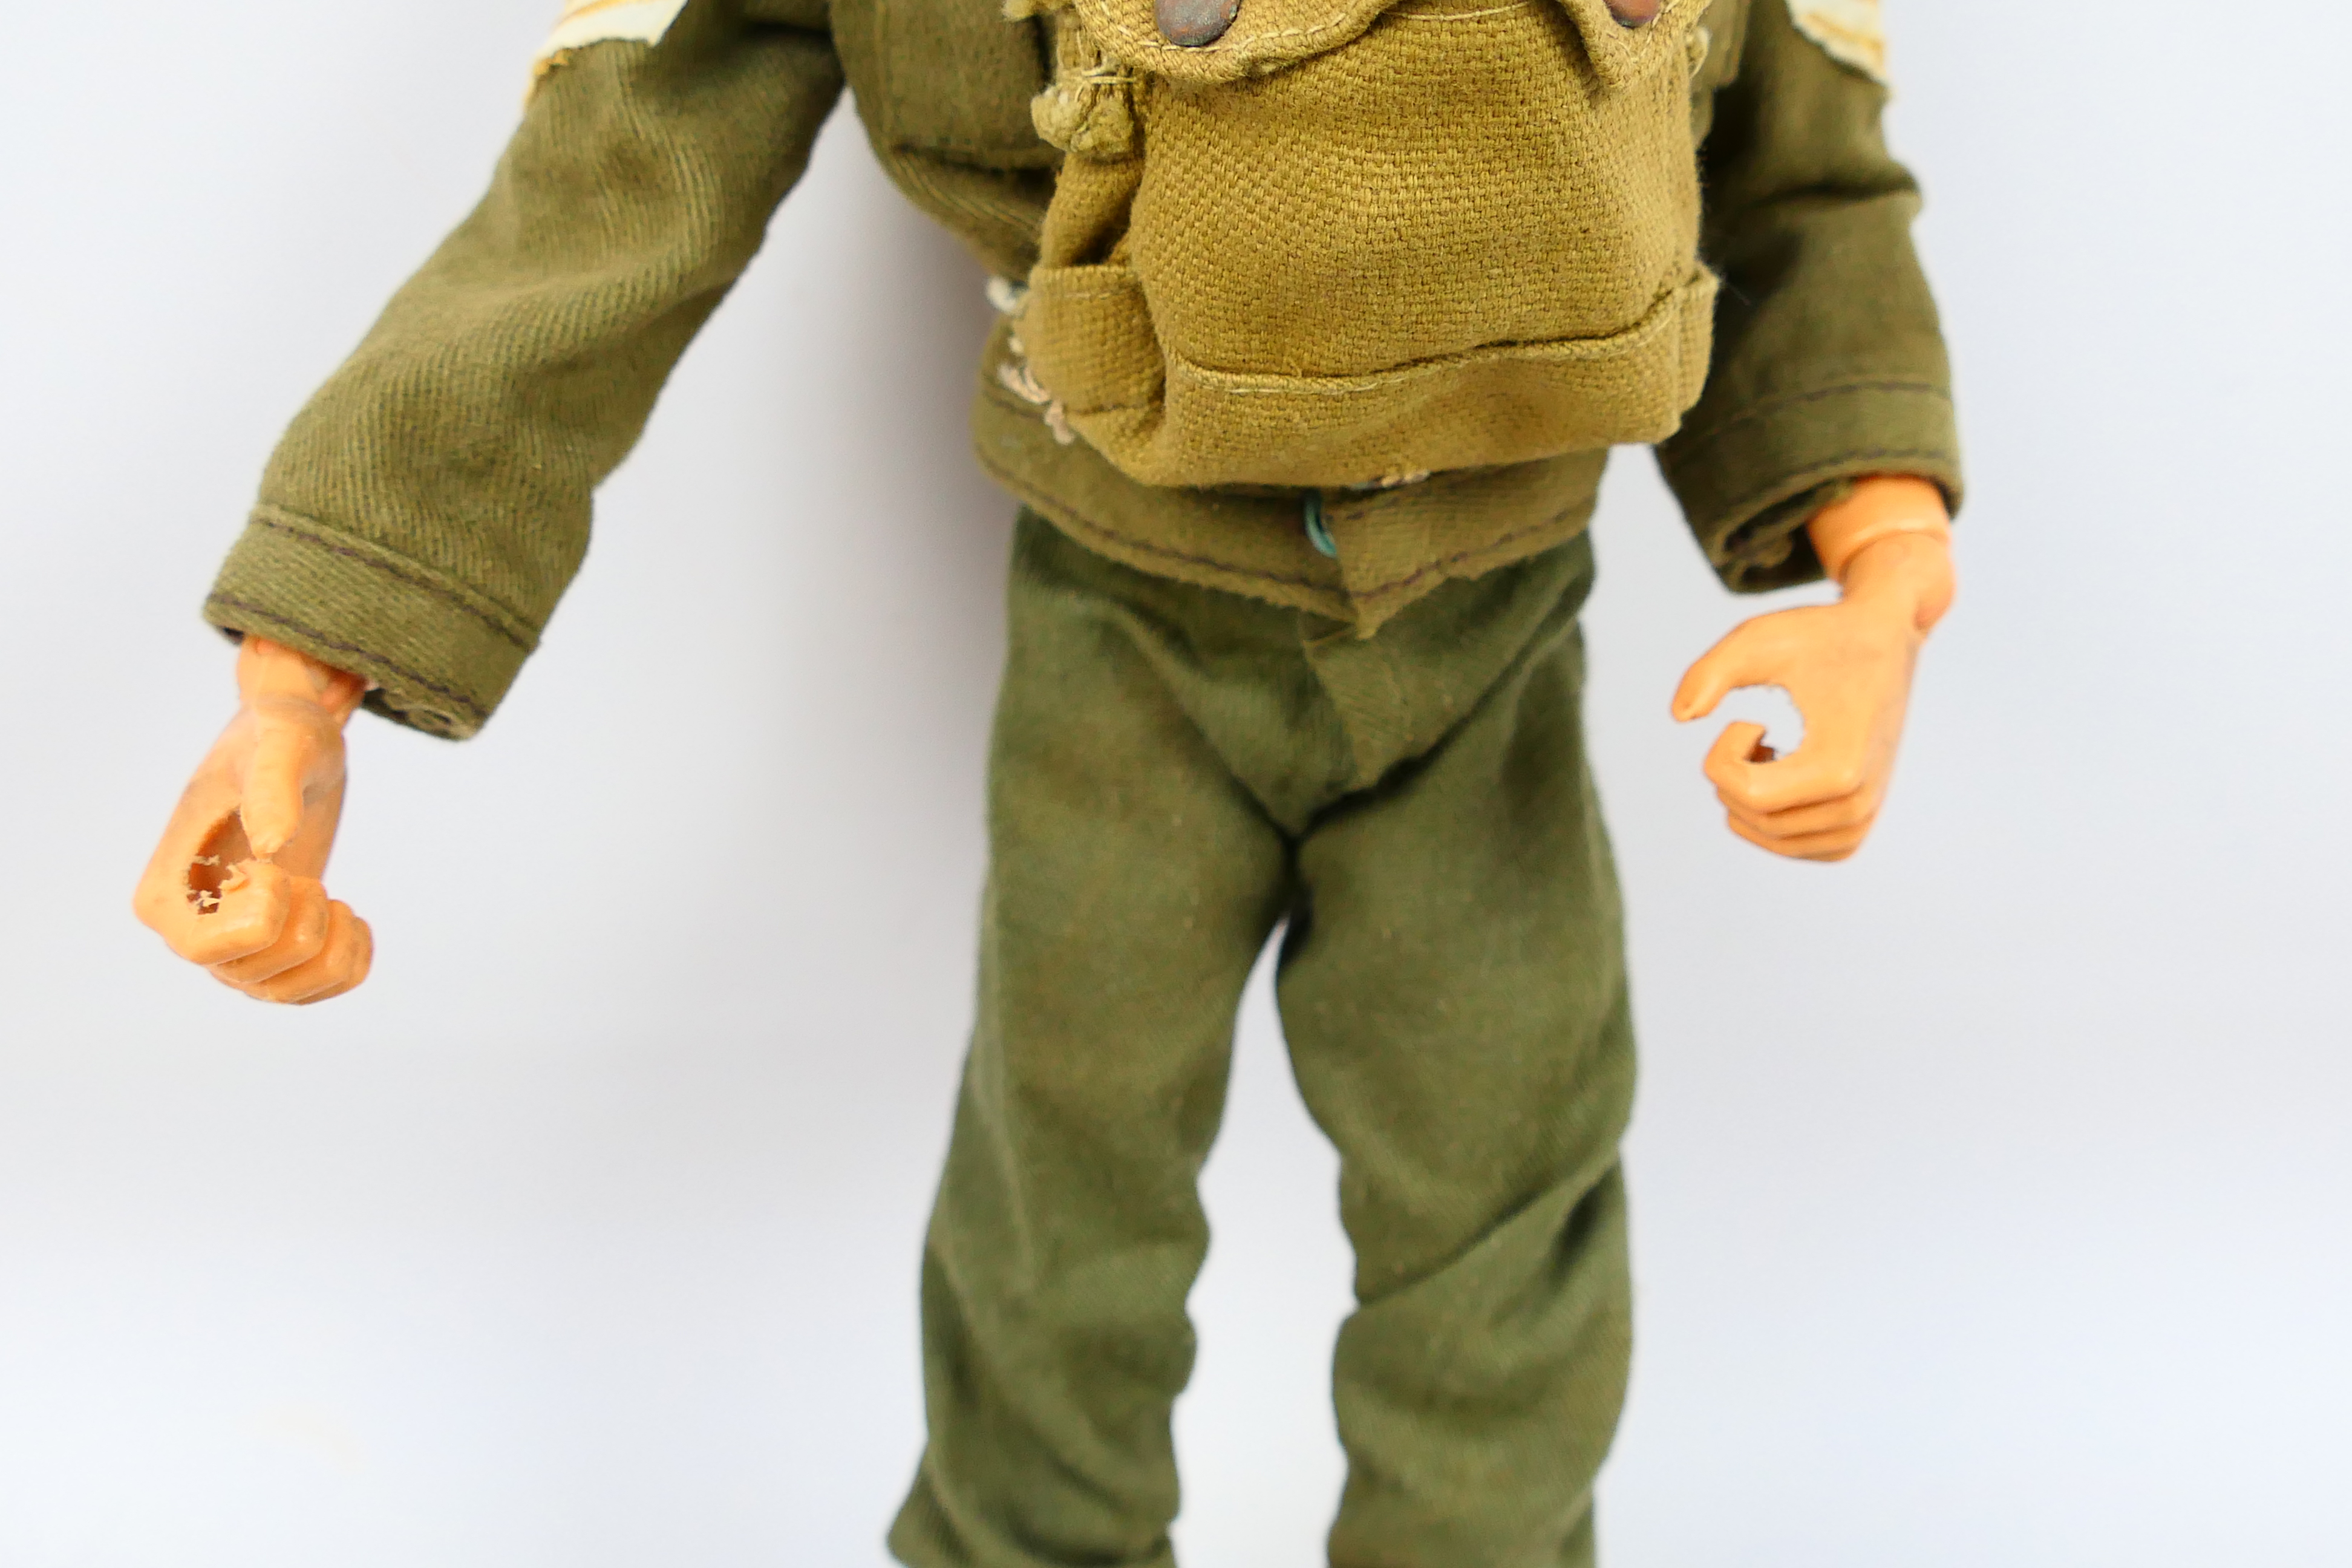 Palitoy - Action Man - A 1978 Action Man action figure with Flock hair and eagle eyes in a British - Image 8 of 16